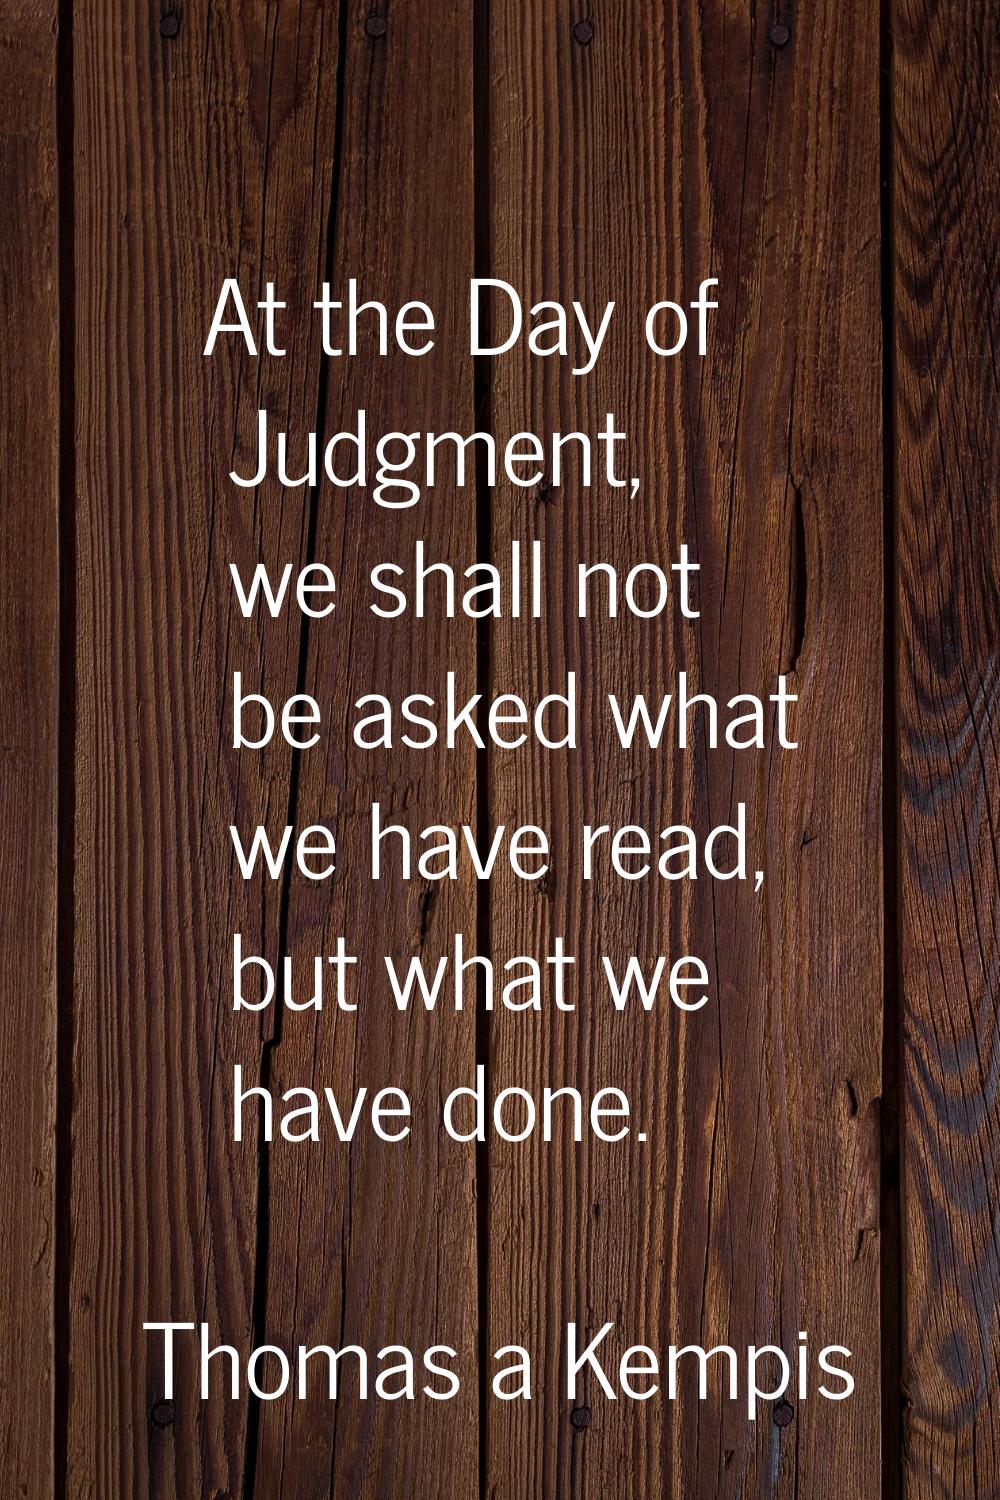 At the Day of Judgment, we shall not be asked what we have read, but what we have done.